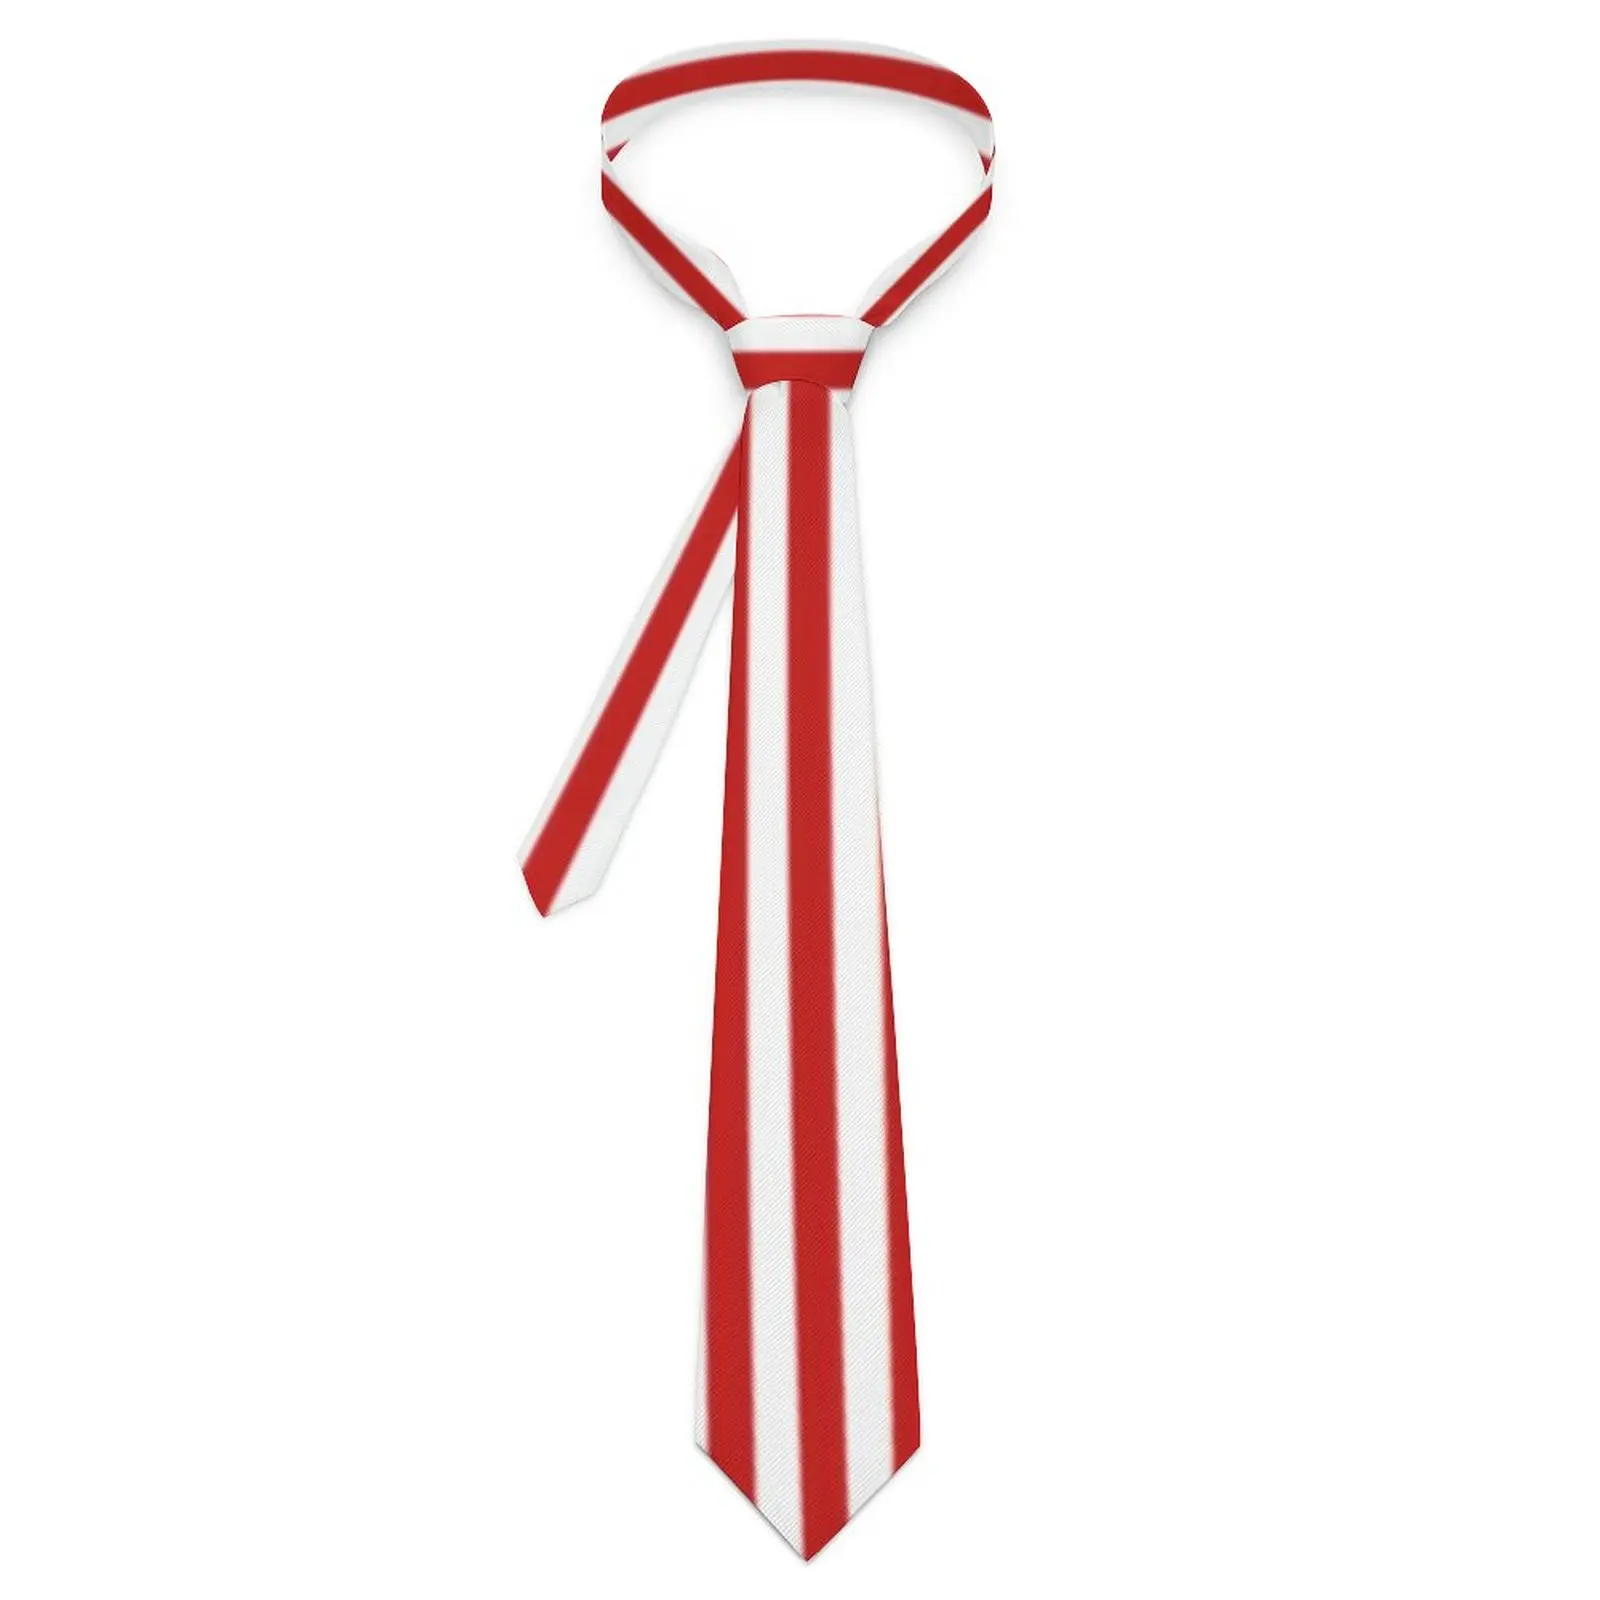 

Vertical Red Striped Tie White Lines Print Daily Wear Neck Ties Cute Funny Neck Tie For Men Graphic Collar Tie Necktie Gift